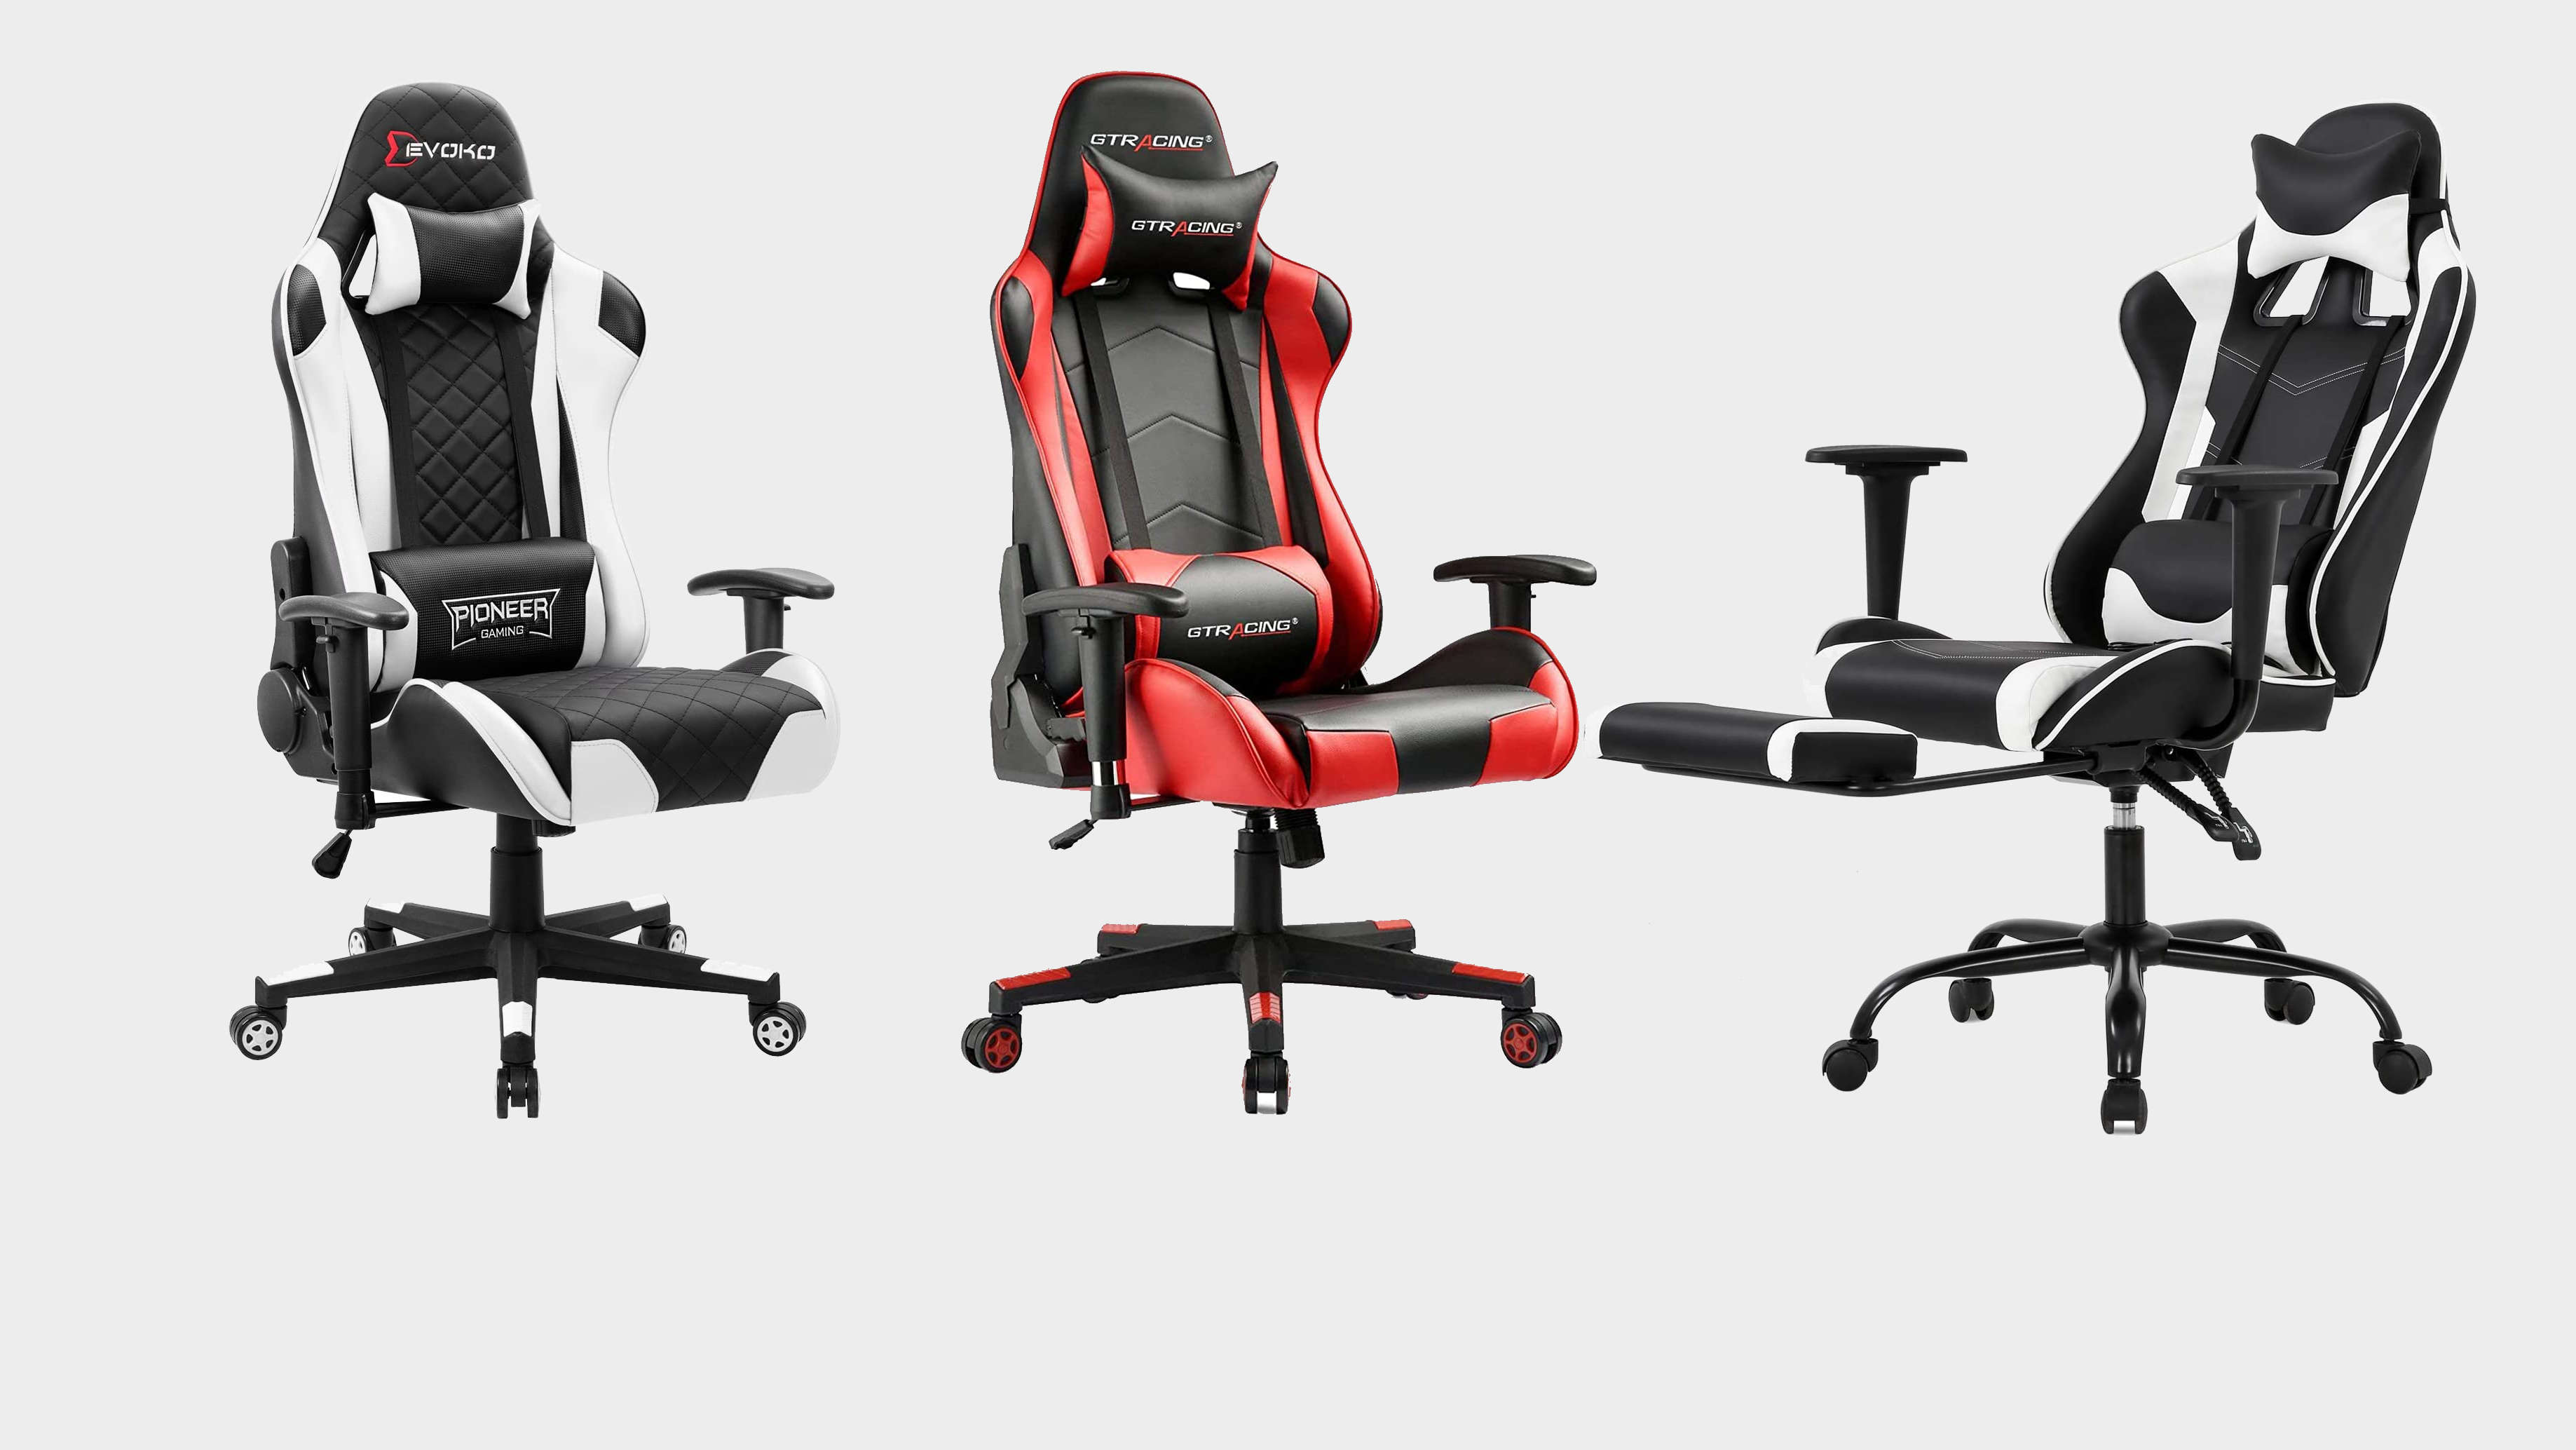 Best cheap gaming chair: Snapshot guide | PC Gamer